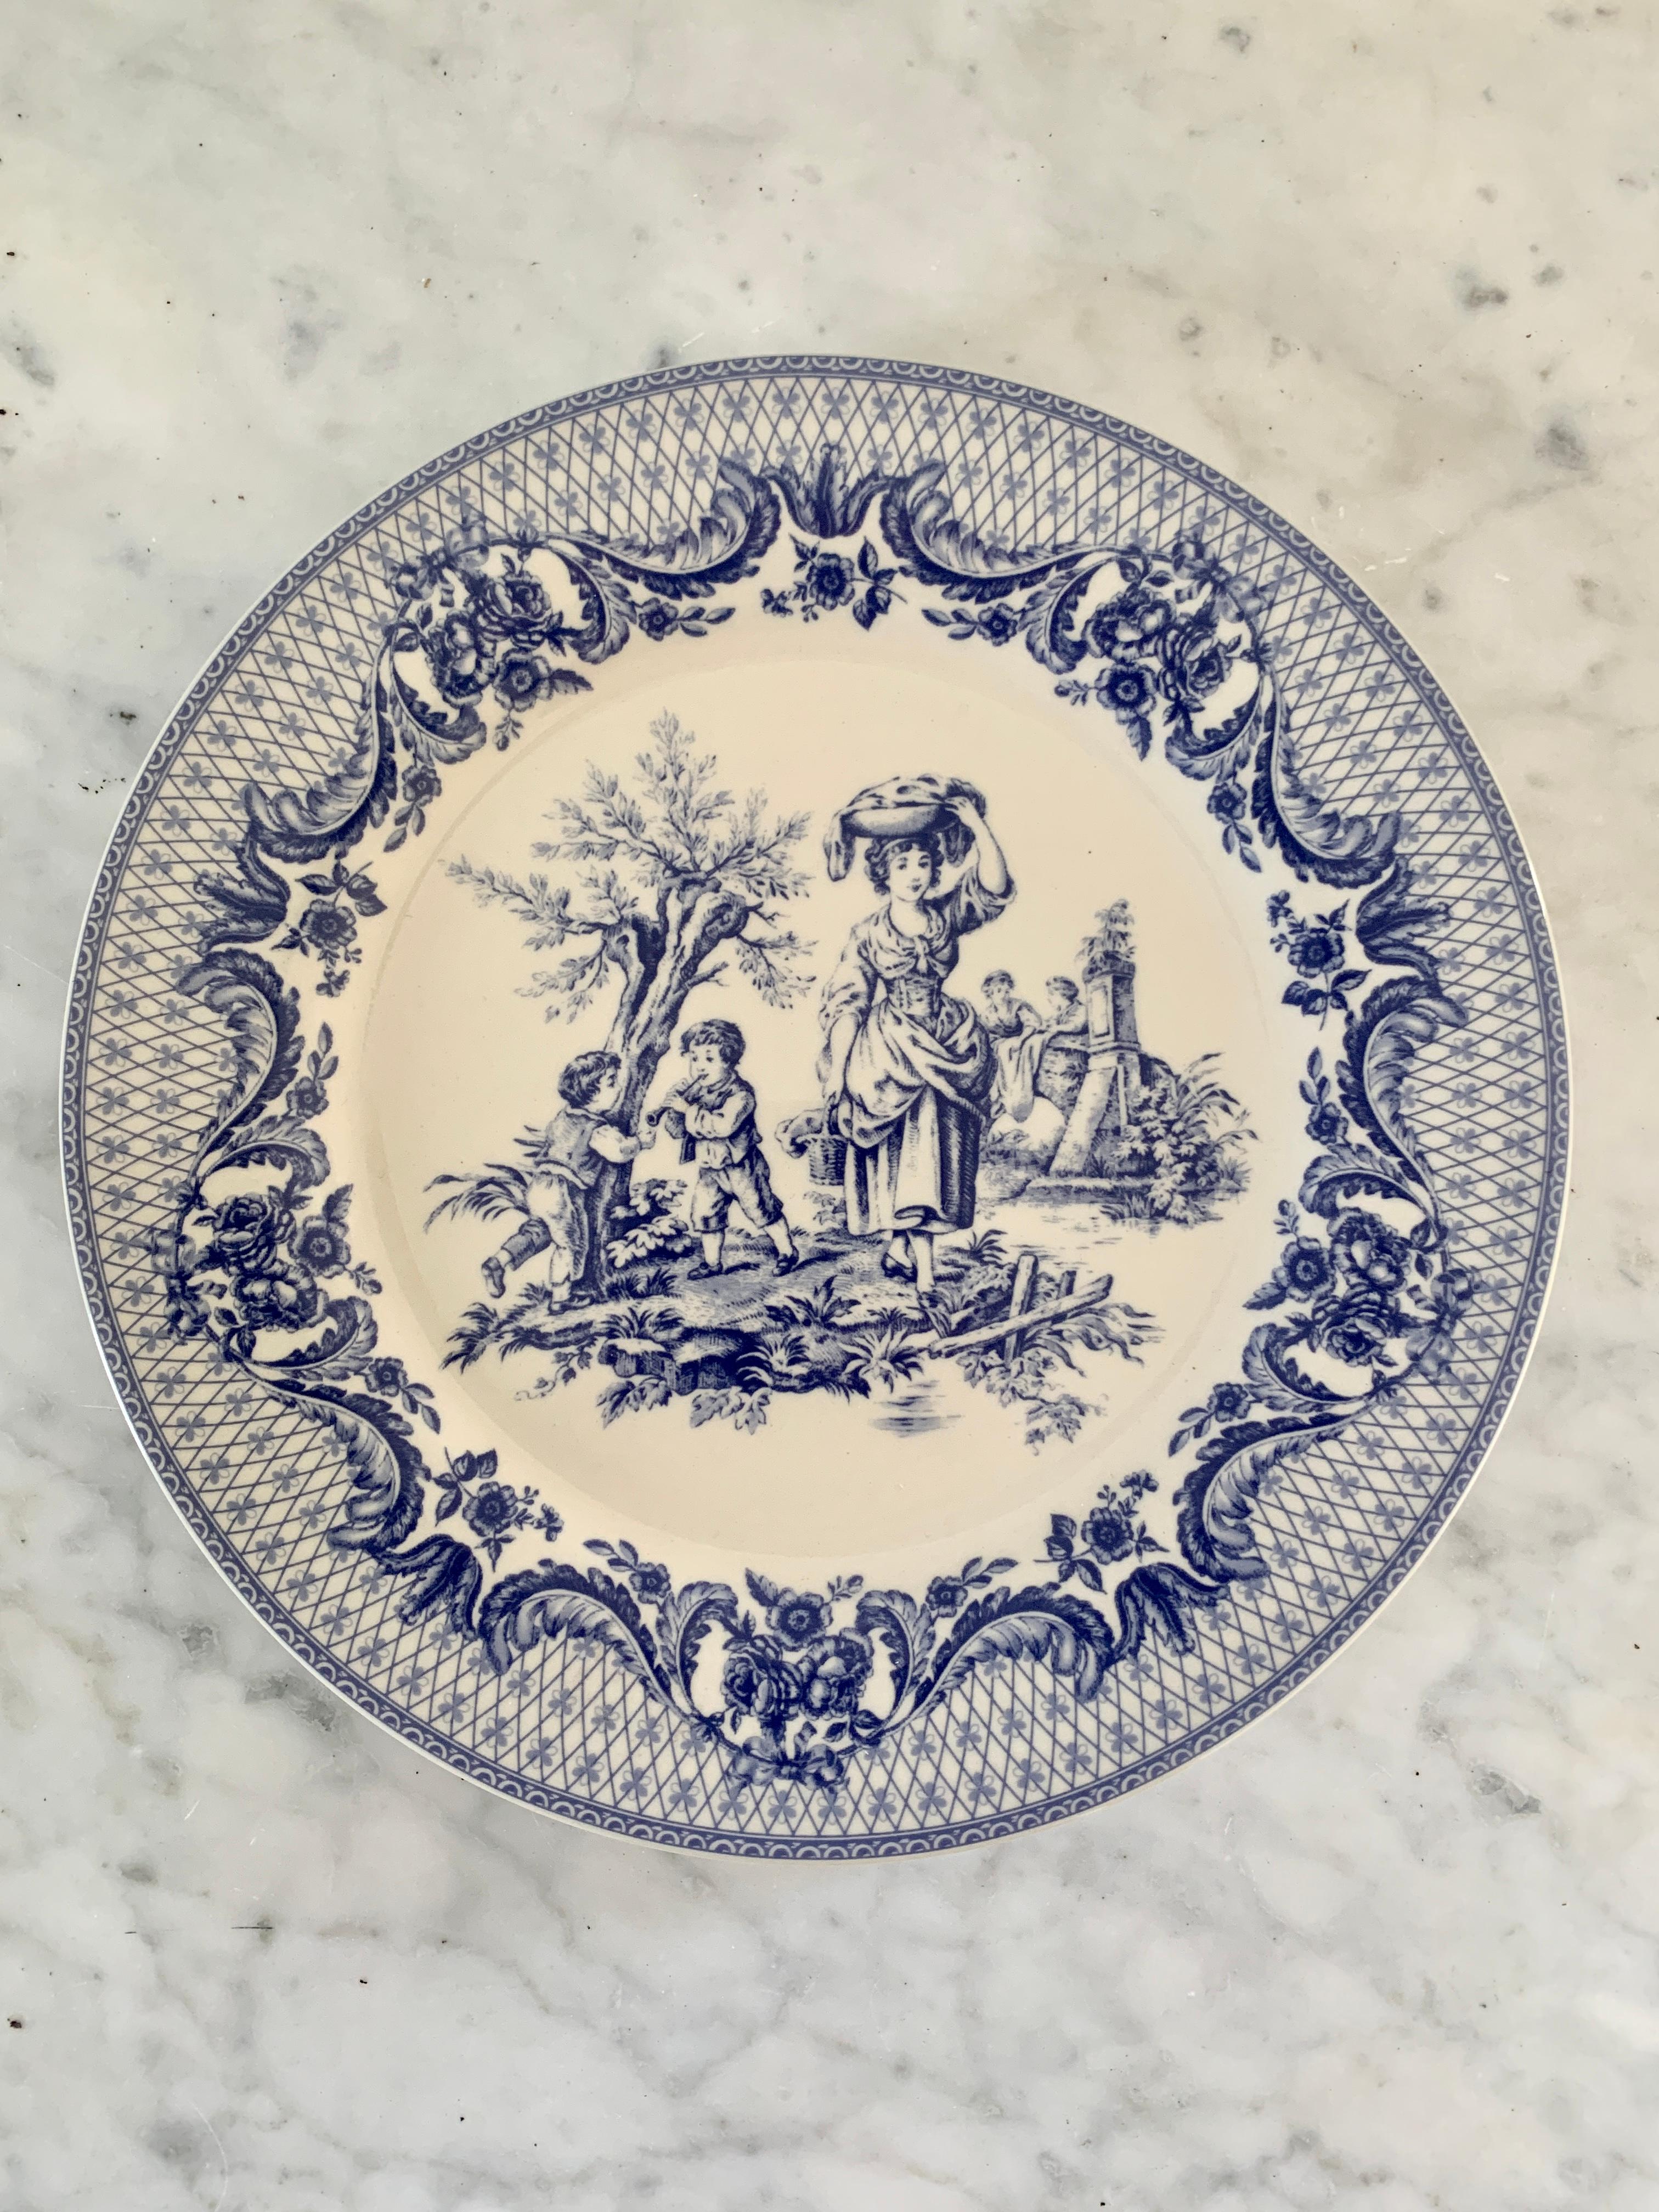 A set of three beautiful Neoclassical style blue and white porcelain plates featuring pastoral scenes, perfect for using at the table or hanging on the wall

USA, Late 20th century

Measures: 8